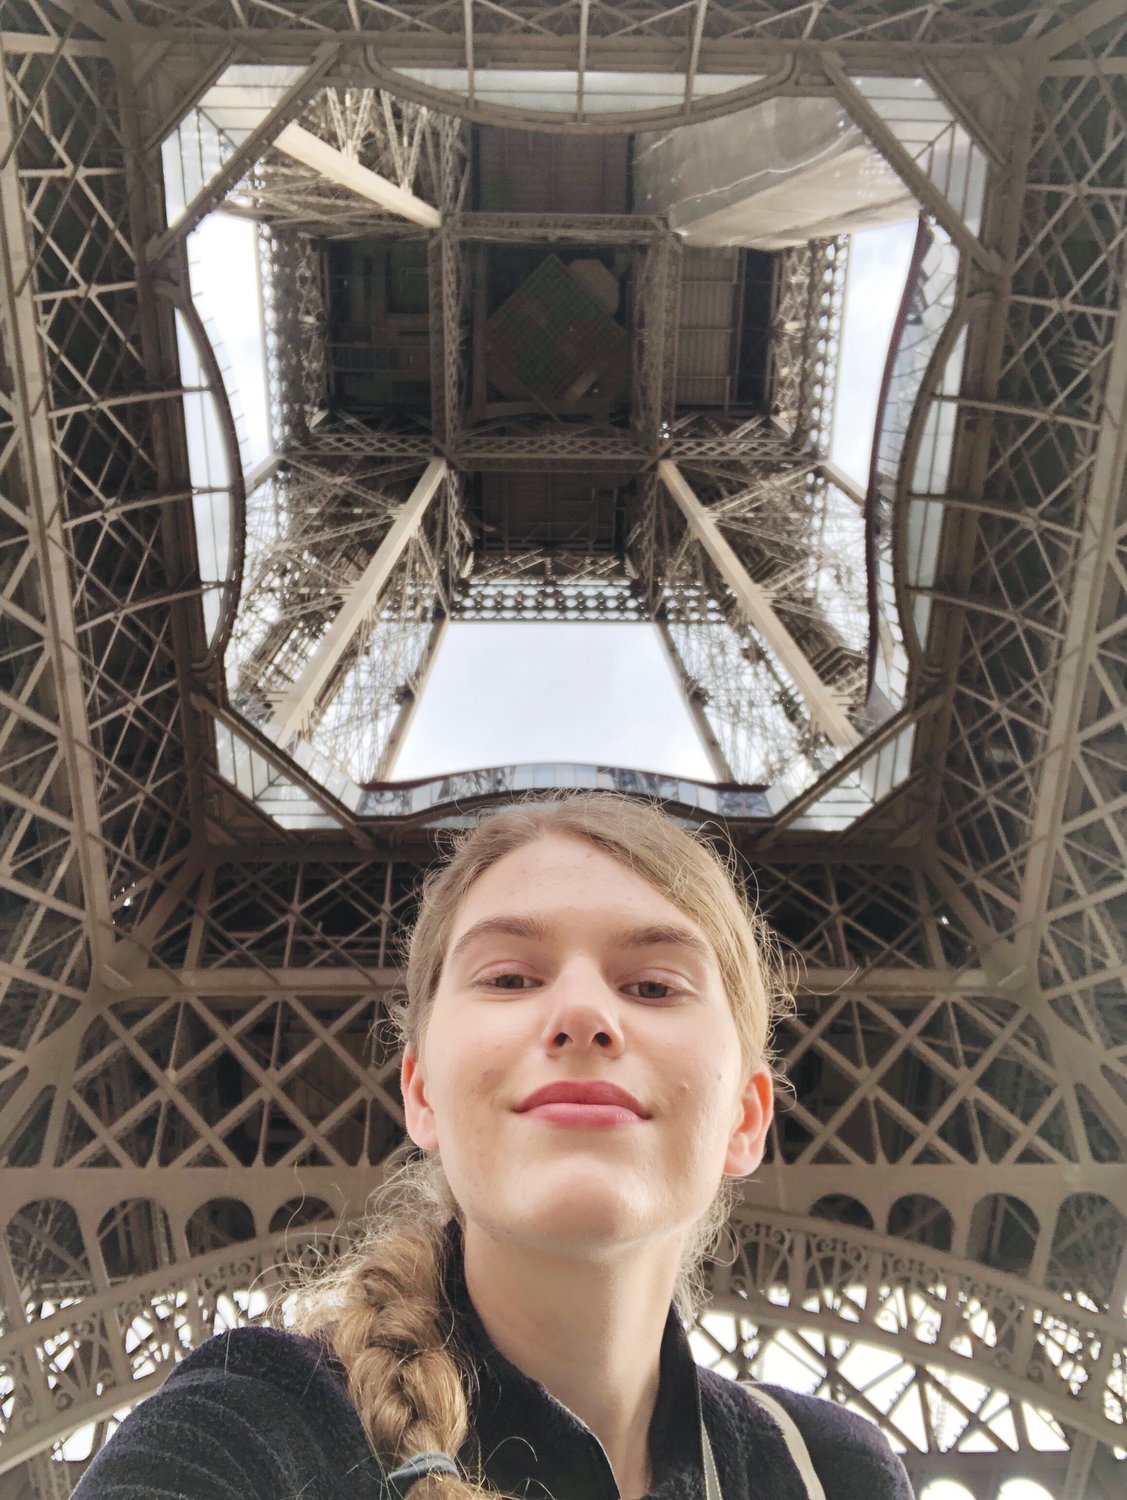 CN+R's Victoria Johnson in May 2019 underneath the Eiffel Tower in Paris, right before she had to take her bag of dirty laundry (the brown strap on her left shoulder) to a dinky laundromat near the tower.